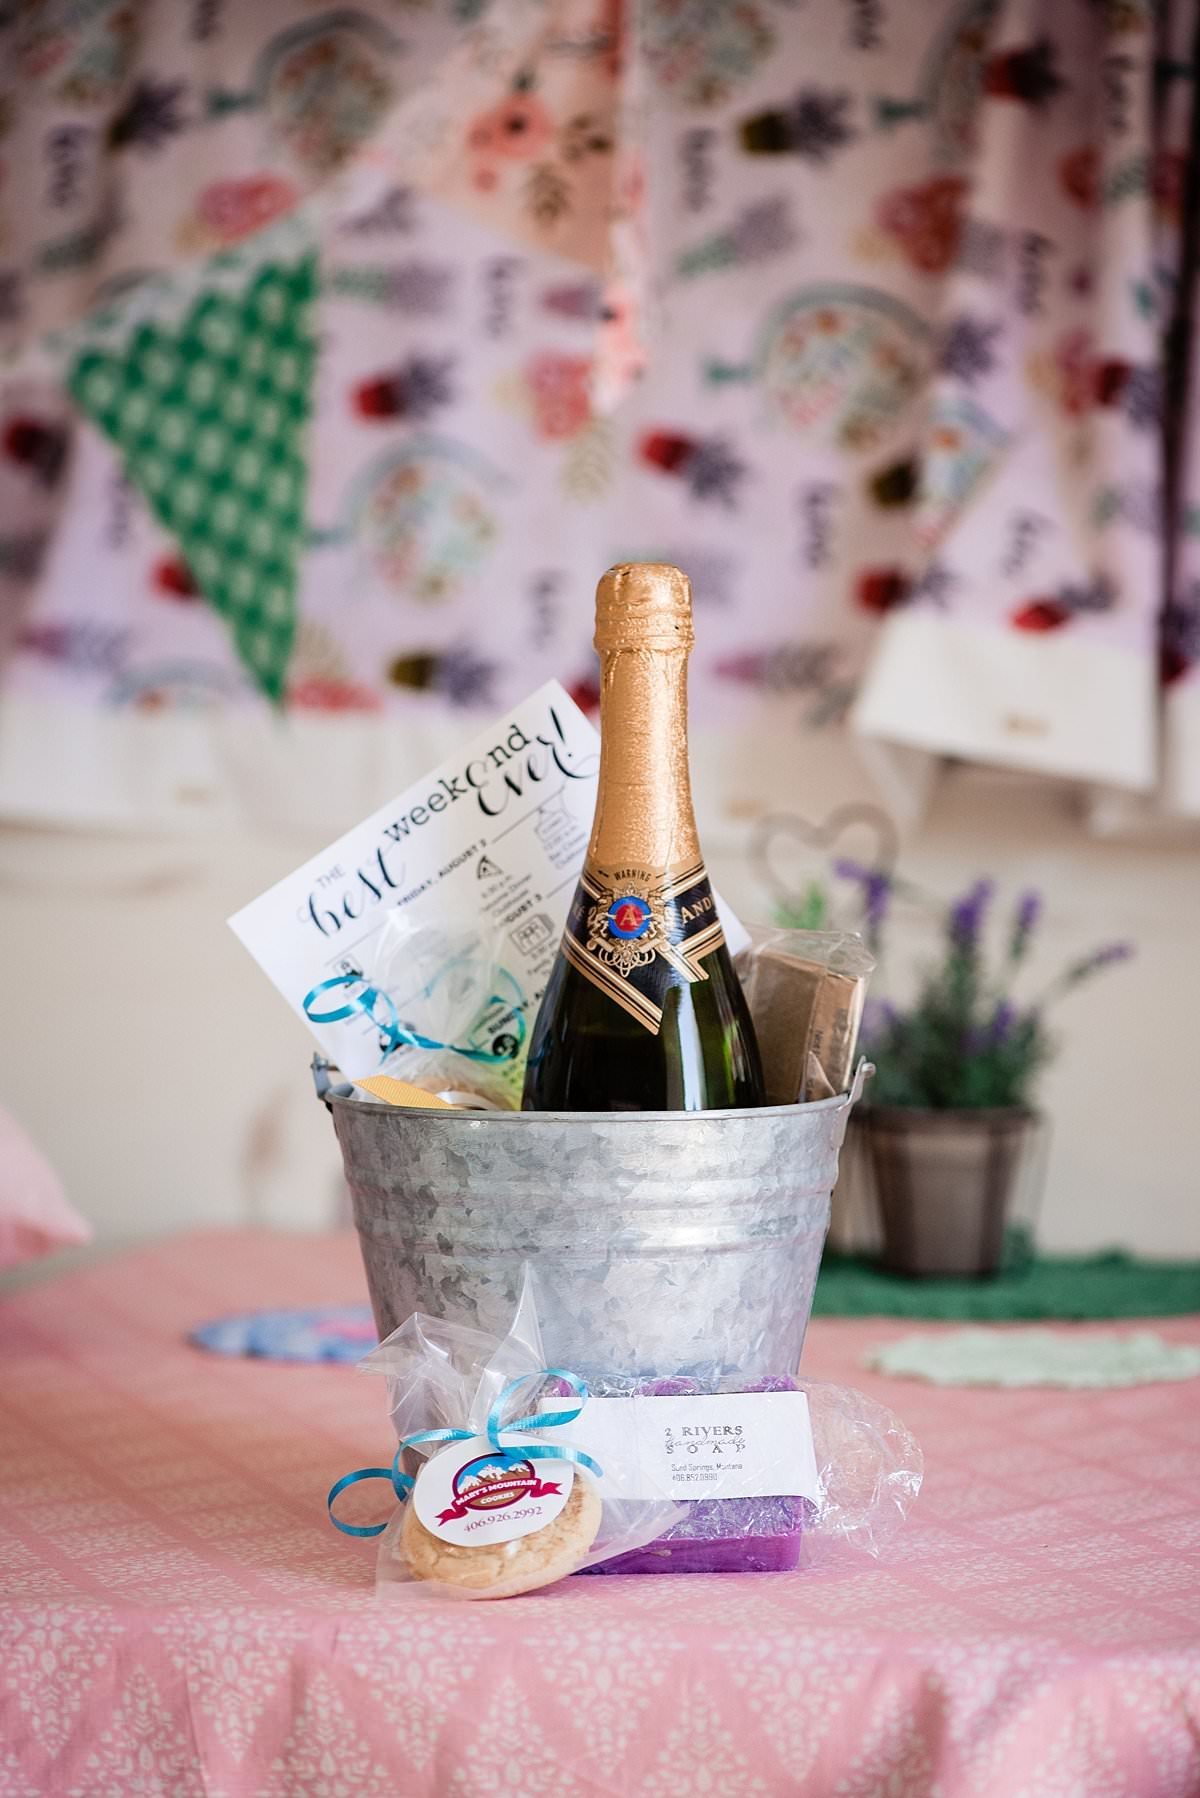 Bucket filled with Montana inspired gifts for wedding guests upon their arrival including a timeline and bottle of champagne